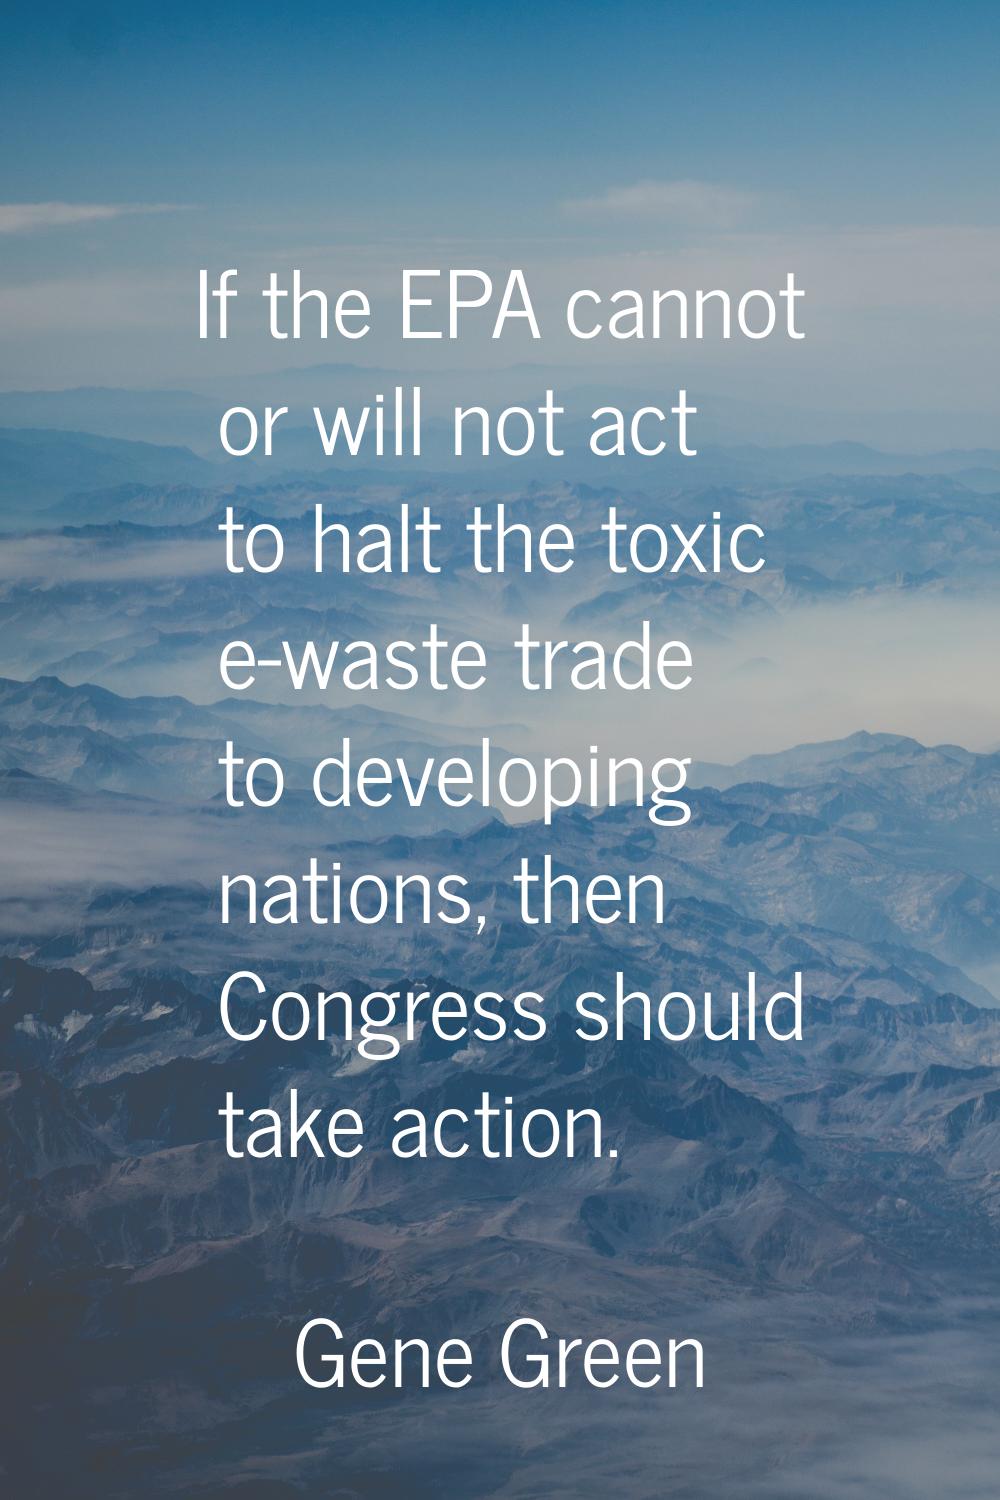 If the EPA cannot or will not act to halt the toxic e-waste trade to developing nations, then Congr